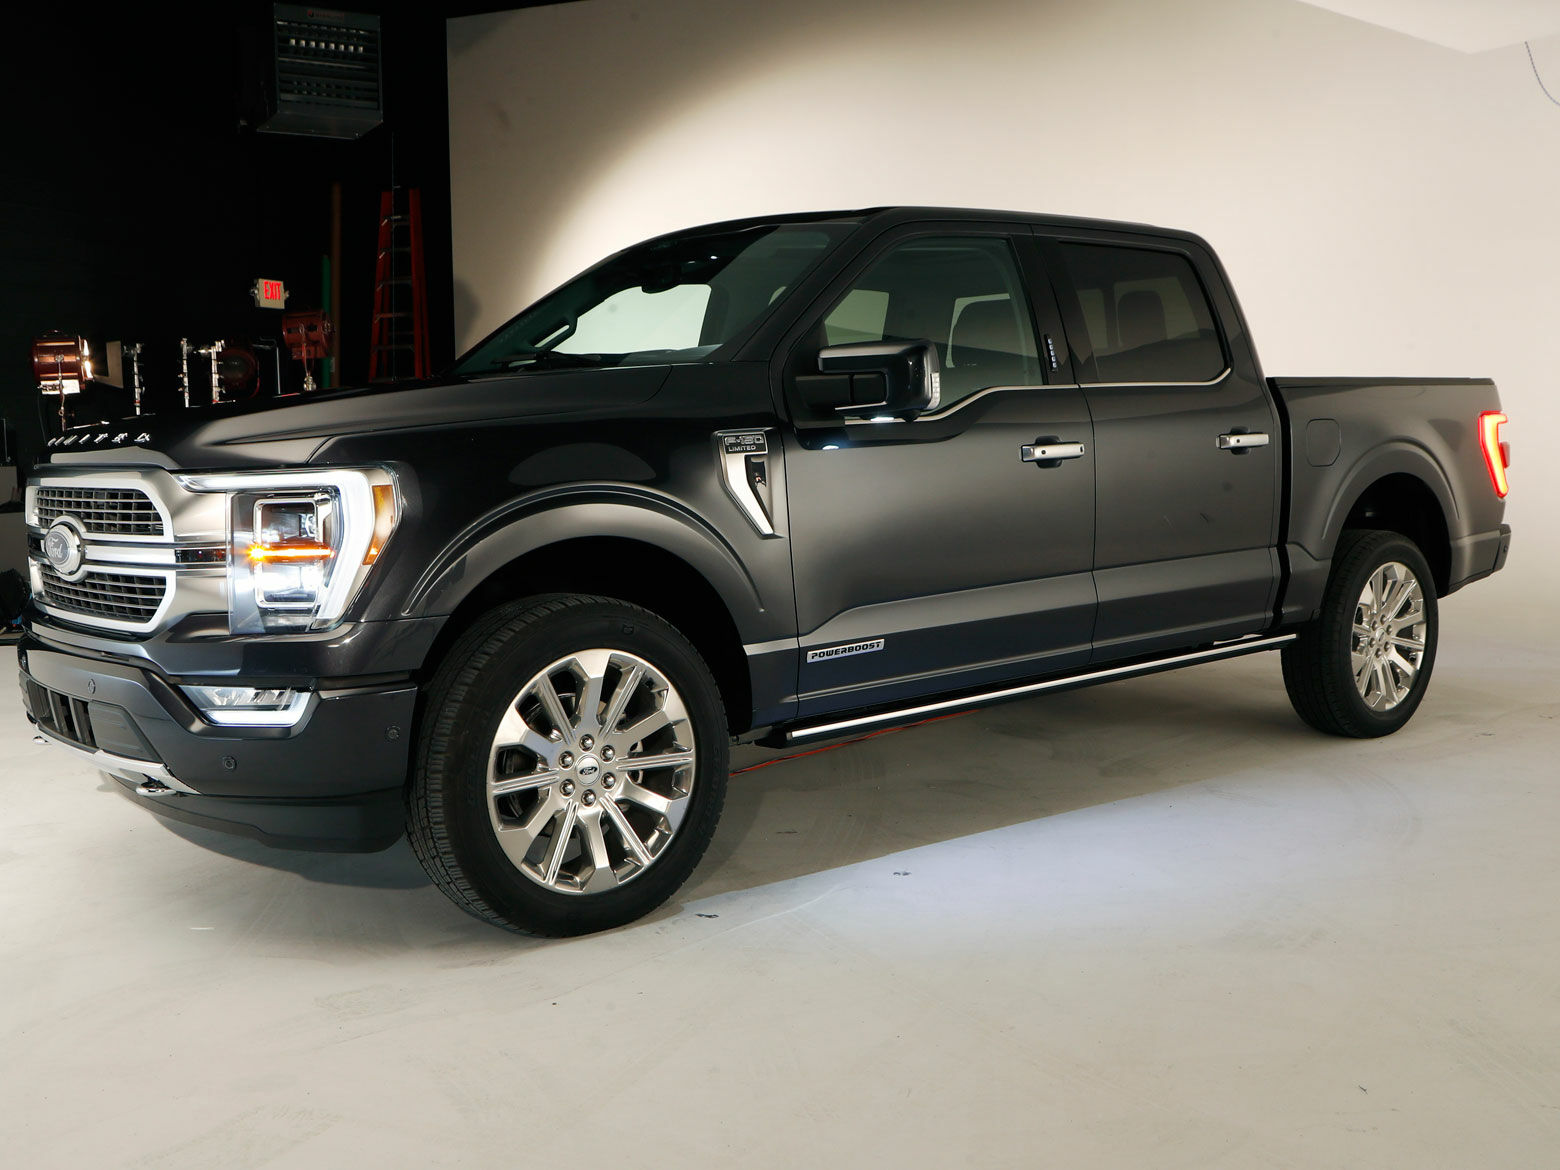 <h3><strong>2020 Ford F-150</strong></h3>
<p><strong>Purchase Deal: Up to $4,750 cash back</strong></p>
<p>Ford is offering as much as $4,750 cash back during the Fourth of July holiday on America’s favorite pickup, the <a href="https://cars.usnews.com/cars-trucks/ford/f-150">2020 Ford F-150</a>. However, you&#8217;ll want to move quickly, as plant closures driven by the coronavirus pandemic have left some dealers with limited stock of popular full-size pickup models. This offer is not available everywhere, so be sure to contact your local Ford dealership for details.</p>
<p>In our <a href="https://cars.usnews.com/cars-trucks/rankings/full-size-pickup-trucks">ranking of full-size pickups</a>, the 2020 F-150 earns the top spot. Not only does it have a fantastic predicted reliability rating of 4.5 out of five, but it&#8217;s also offered with a broad variety of engines, cabin styles, trim levels, and bed lengths. Properly equipped, it can tow up to 13,200 pounds or carry a maximum payload of 3,270 pounds.</p>
<p>Depending on the model you choose, the F-150’s cabs can seat between three and six. At the top end of the lineup, trims such as the Platinum, King Ranch, and Limited have interiors that rival the interior appointments of some luxury cars. Engine options include several V6 turbos, a V8, and a diesel with excellent fuel economy.</p>
